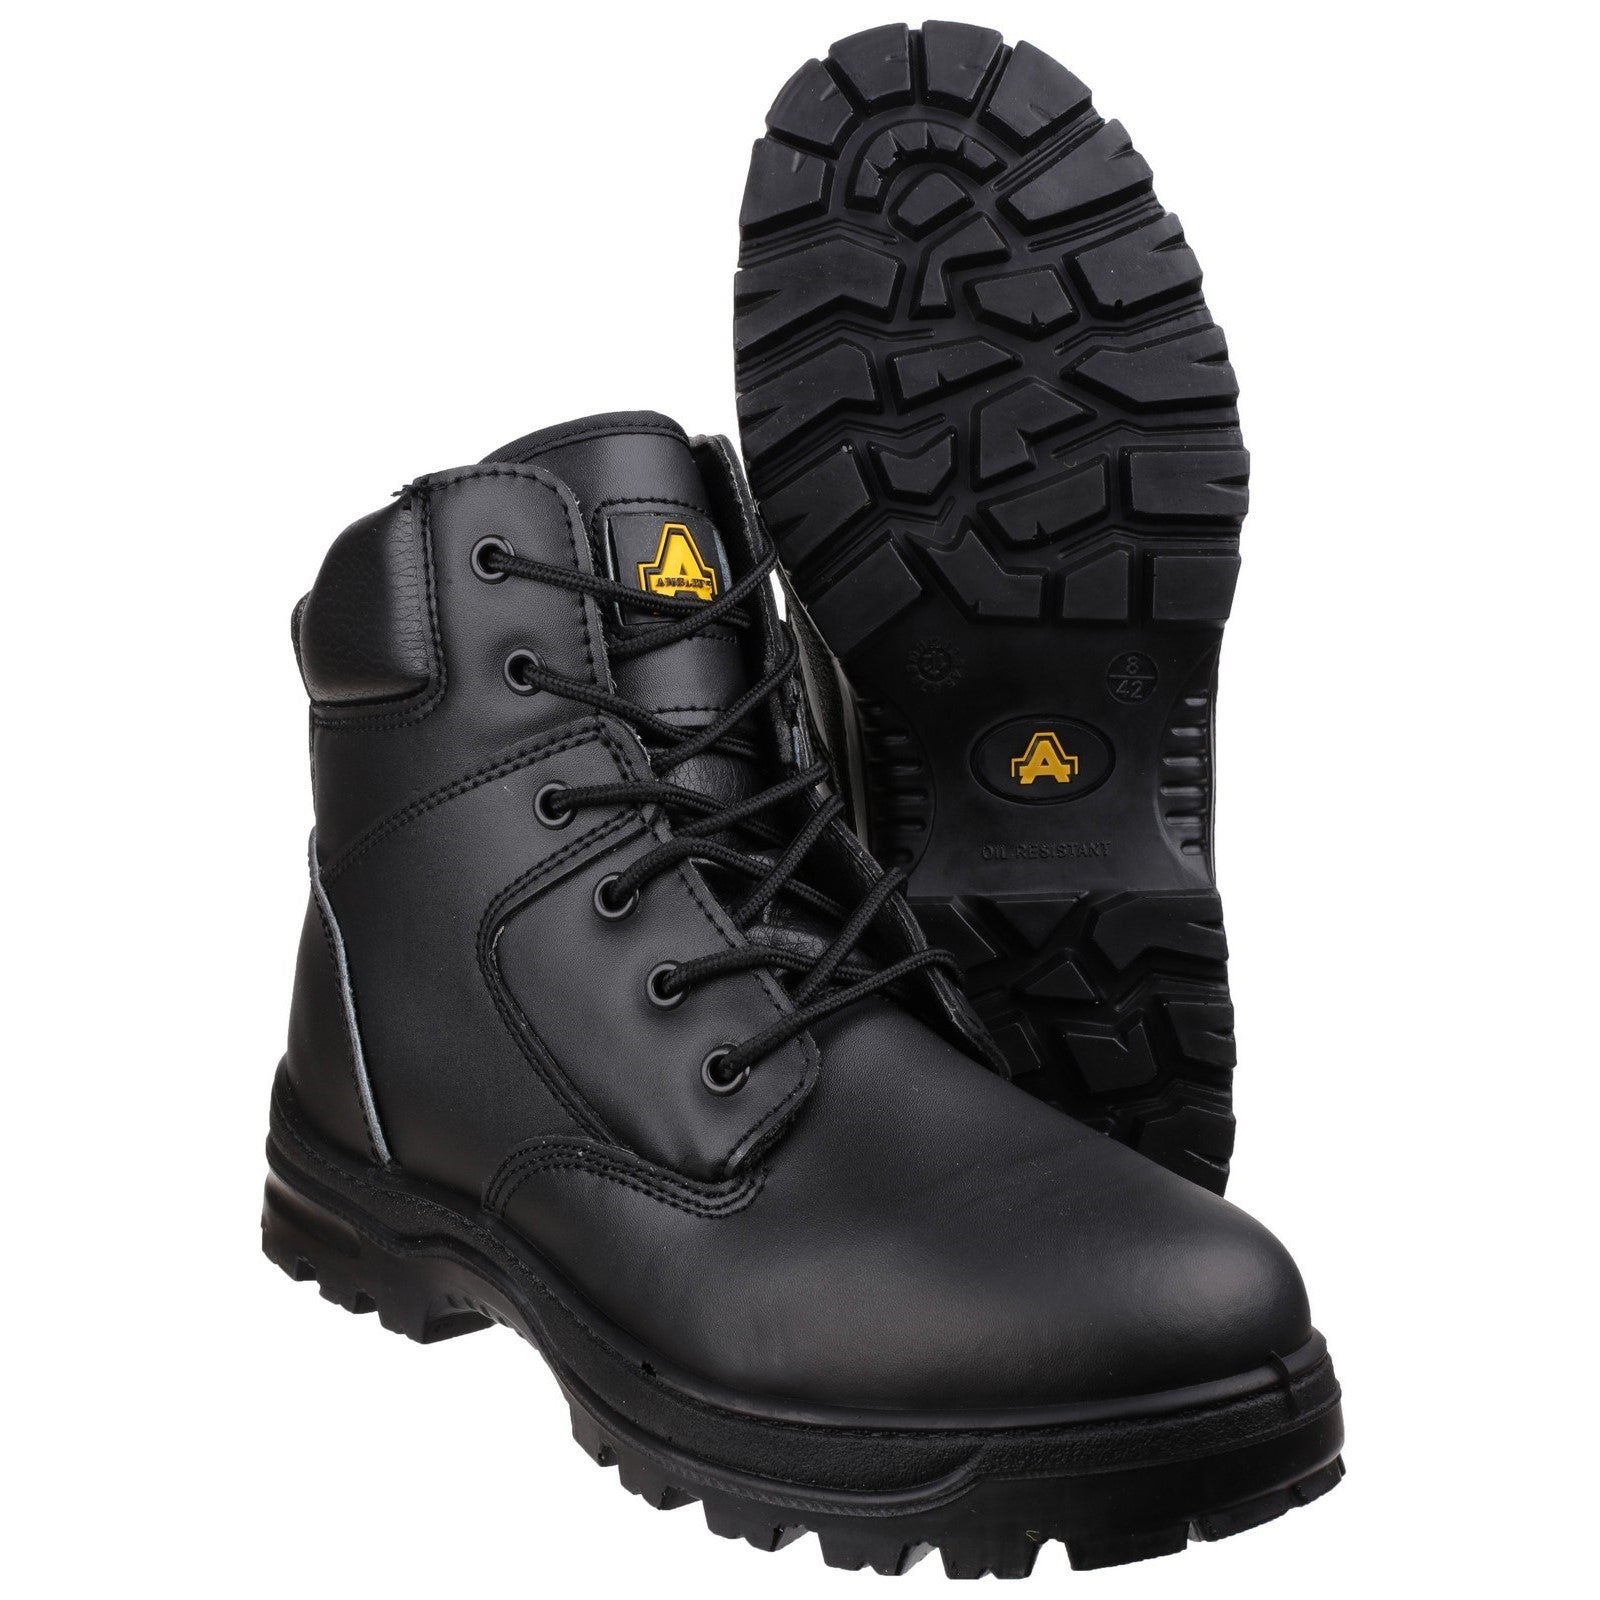 Amblers FS84 Antistatic Lace up Safety Boot